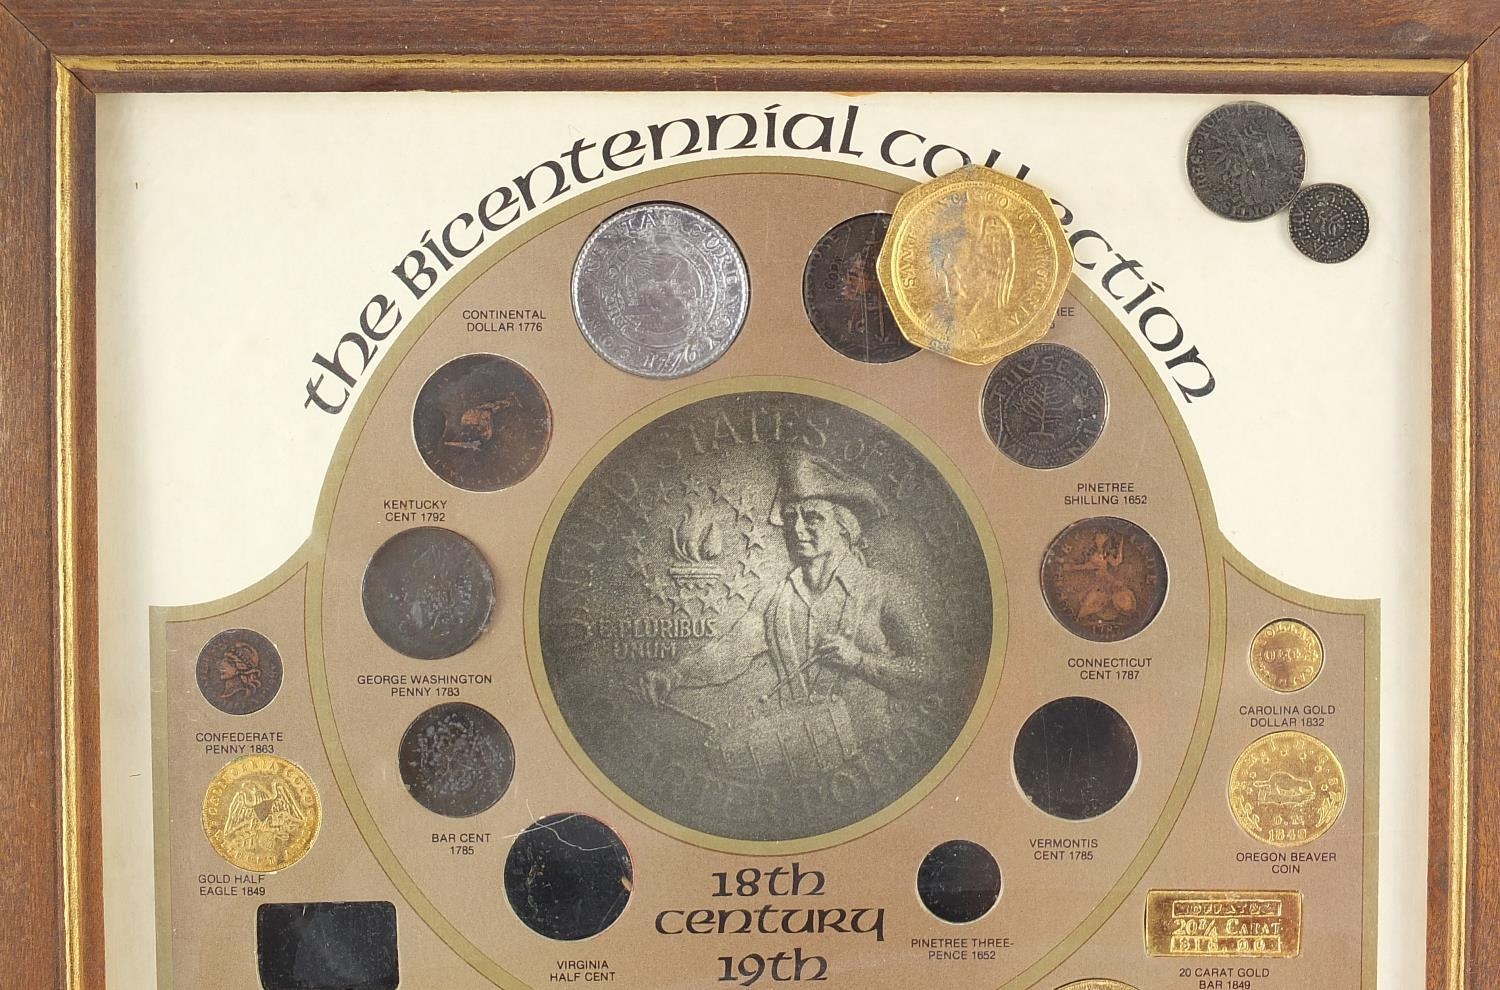 20th century Bicentennial Coin Collection by The Kennedy Mint, framed and glazed, 35cm x 27cm - Image 2 of 4